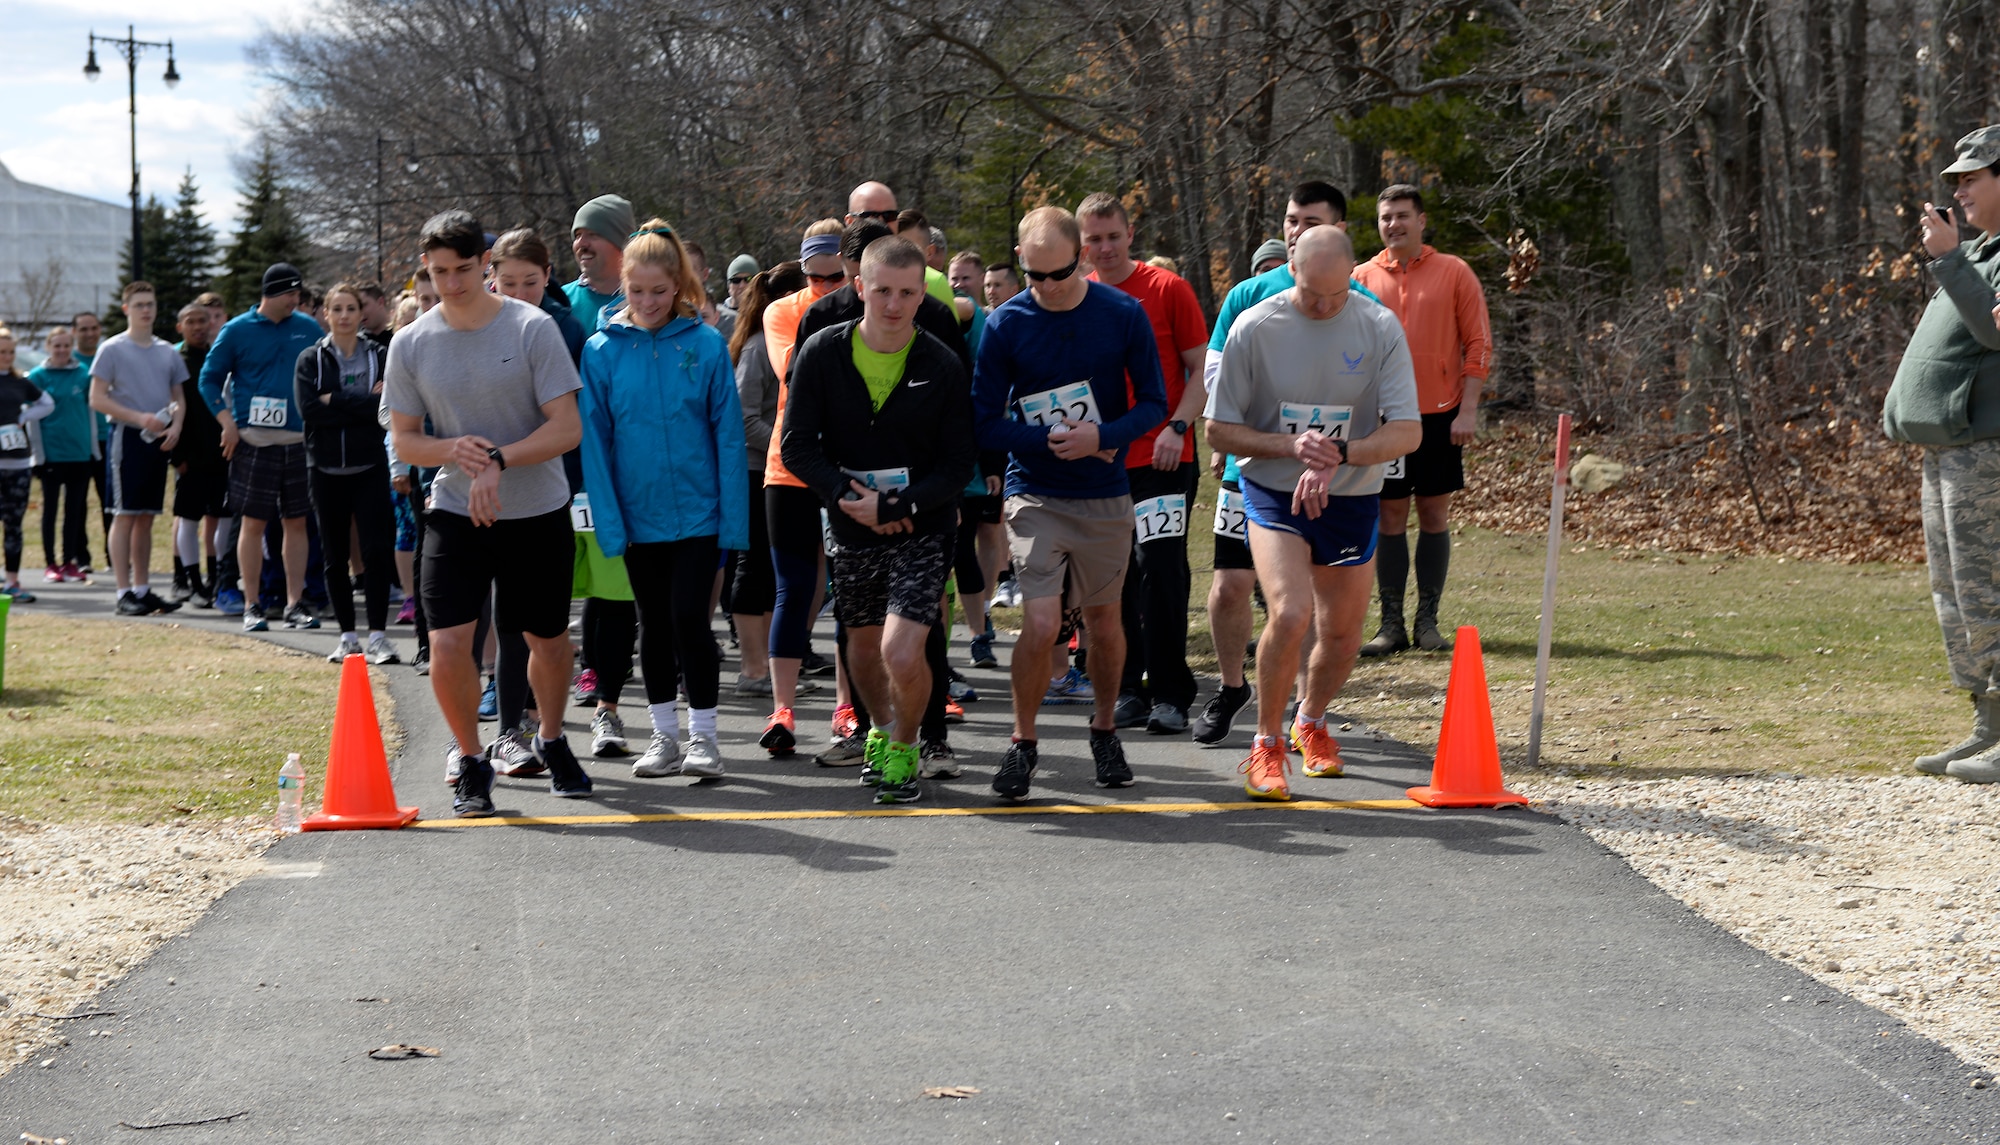 Participants in the Sexual Assault Awareness Month 5K run take off from the starting line on April 08, 2018 at Pease Air National Guard Base, N.H. The Sexual Assault Prevention Response Team hosts the annual event. (N.H. Air National Guard photo by Airman 1st Class Victoria Nelson)